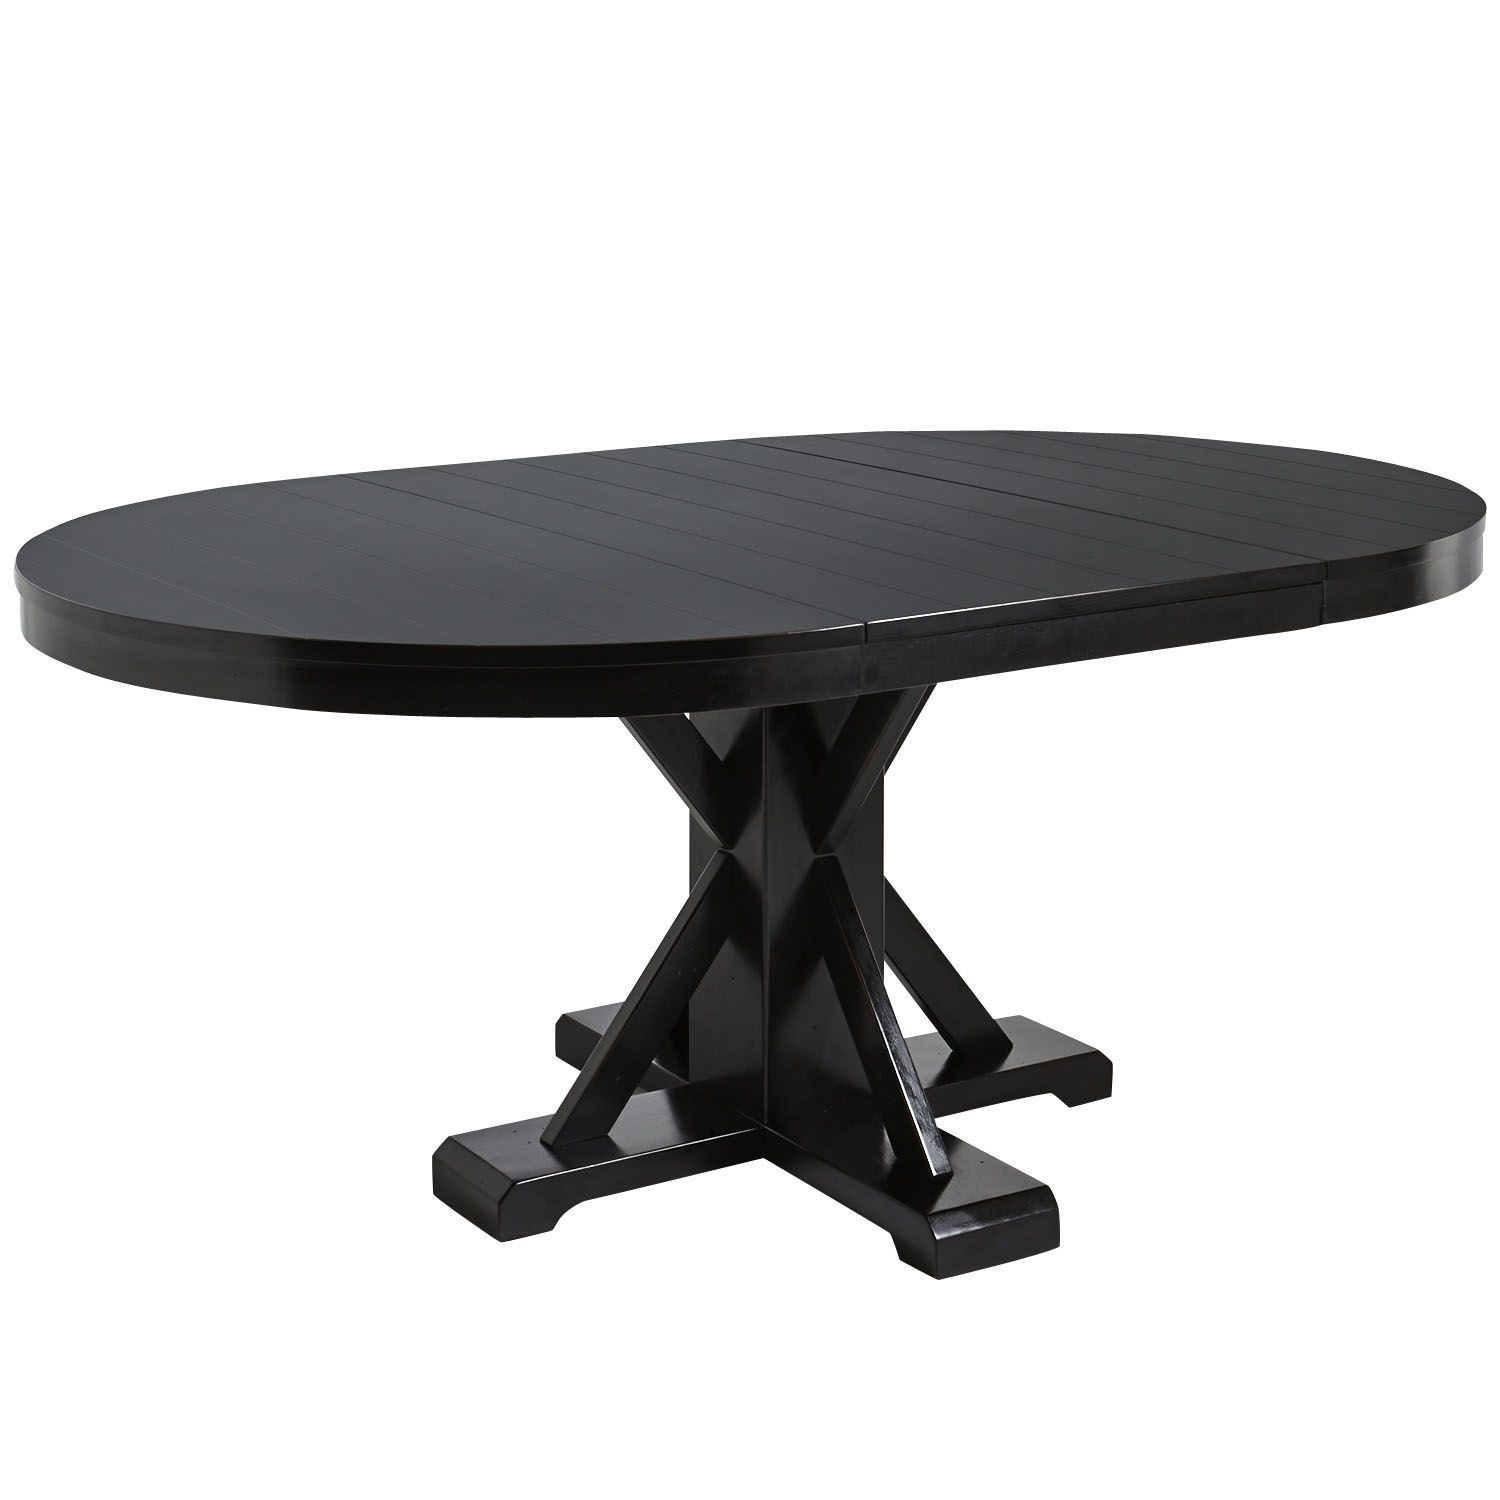 Nolan Extension Round Dining Table – Rubbed Black | Pier 1 In Recent Nolan Round Pedestal Dining Tables (View 10 of 25)